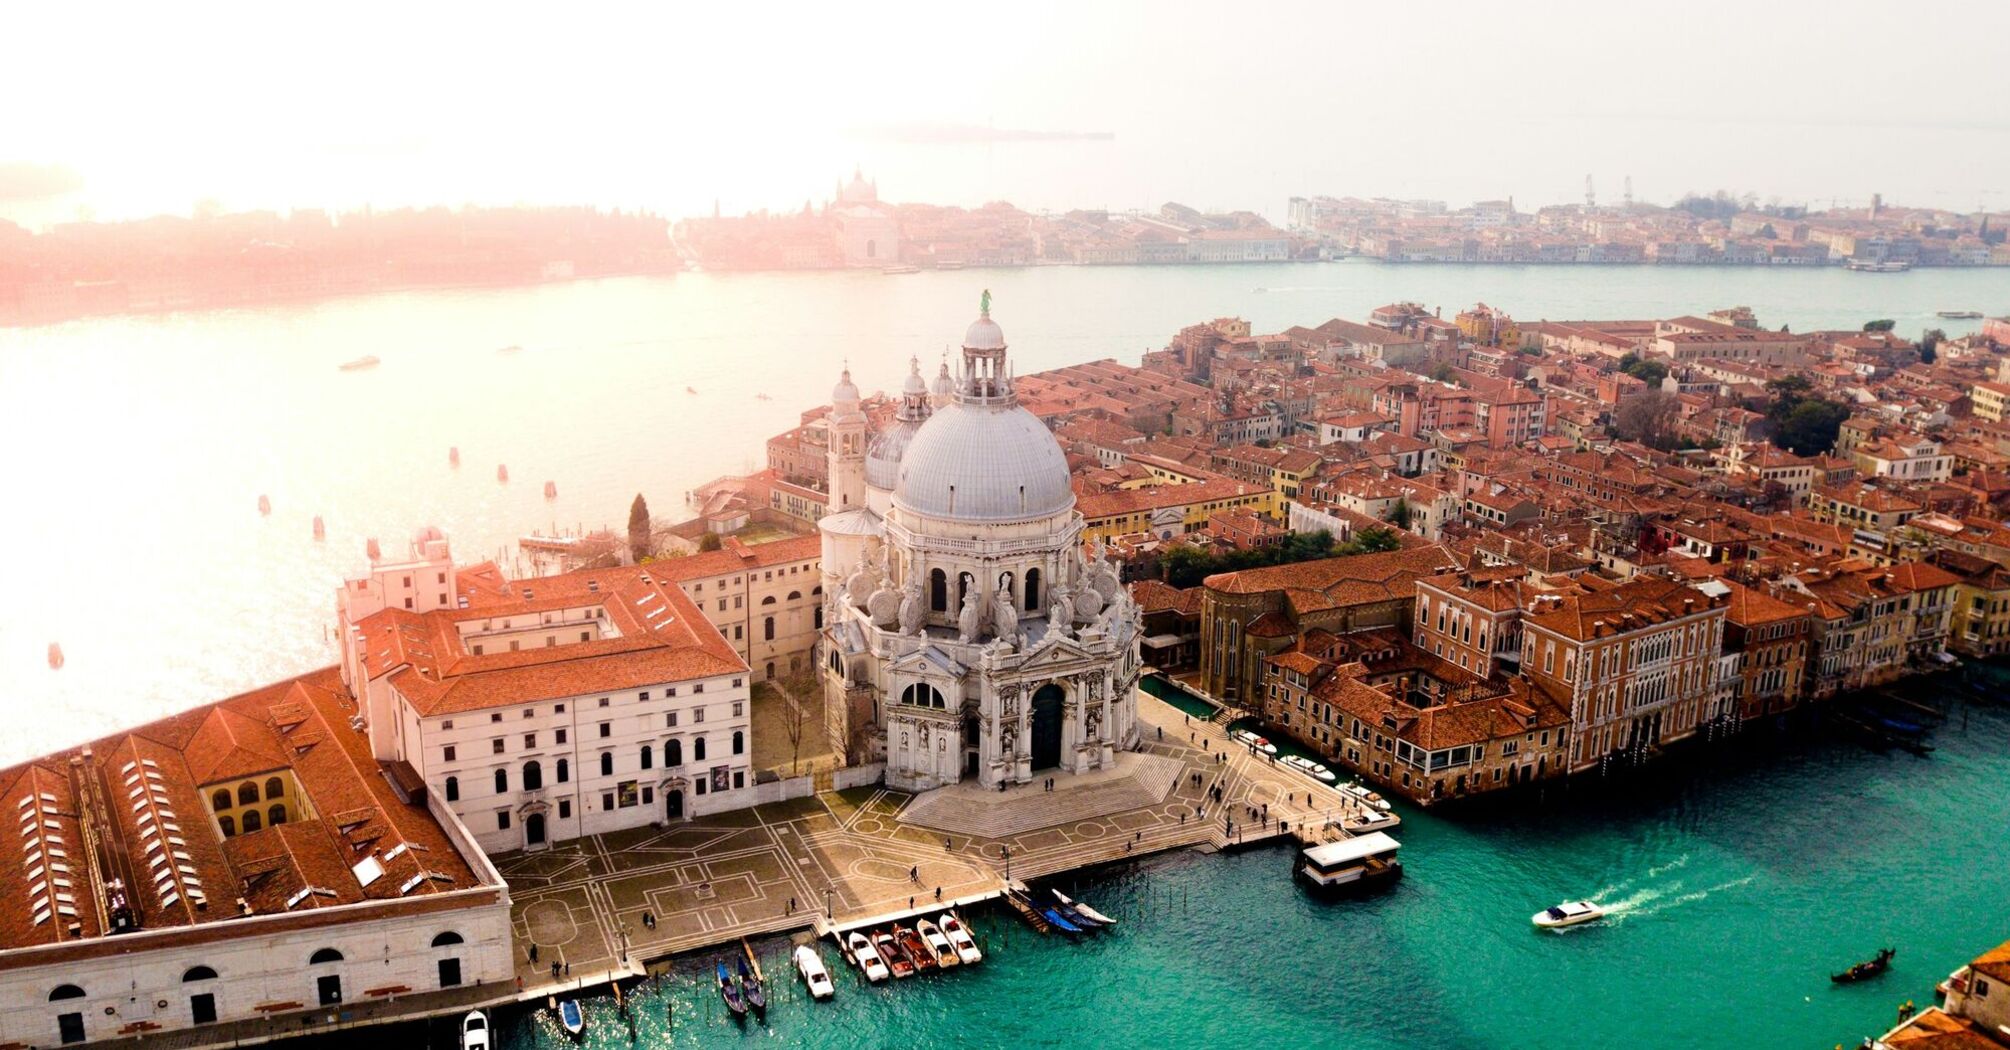 Aerial view of Venice with historical buildings and the Grand Canal